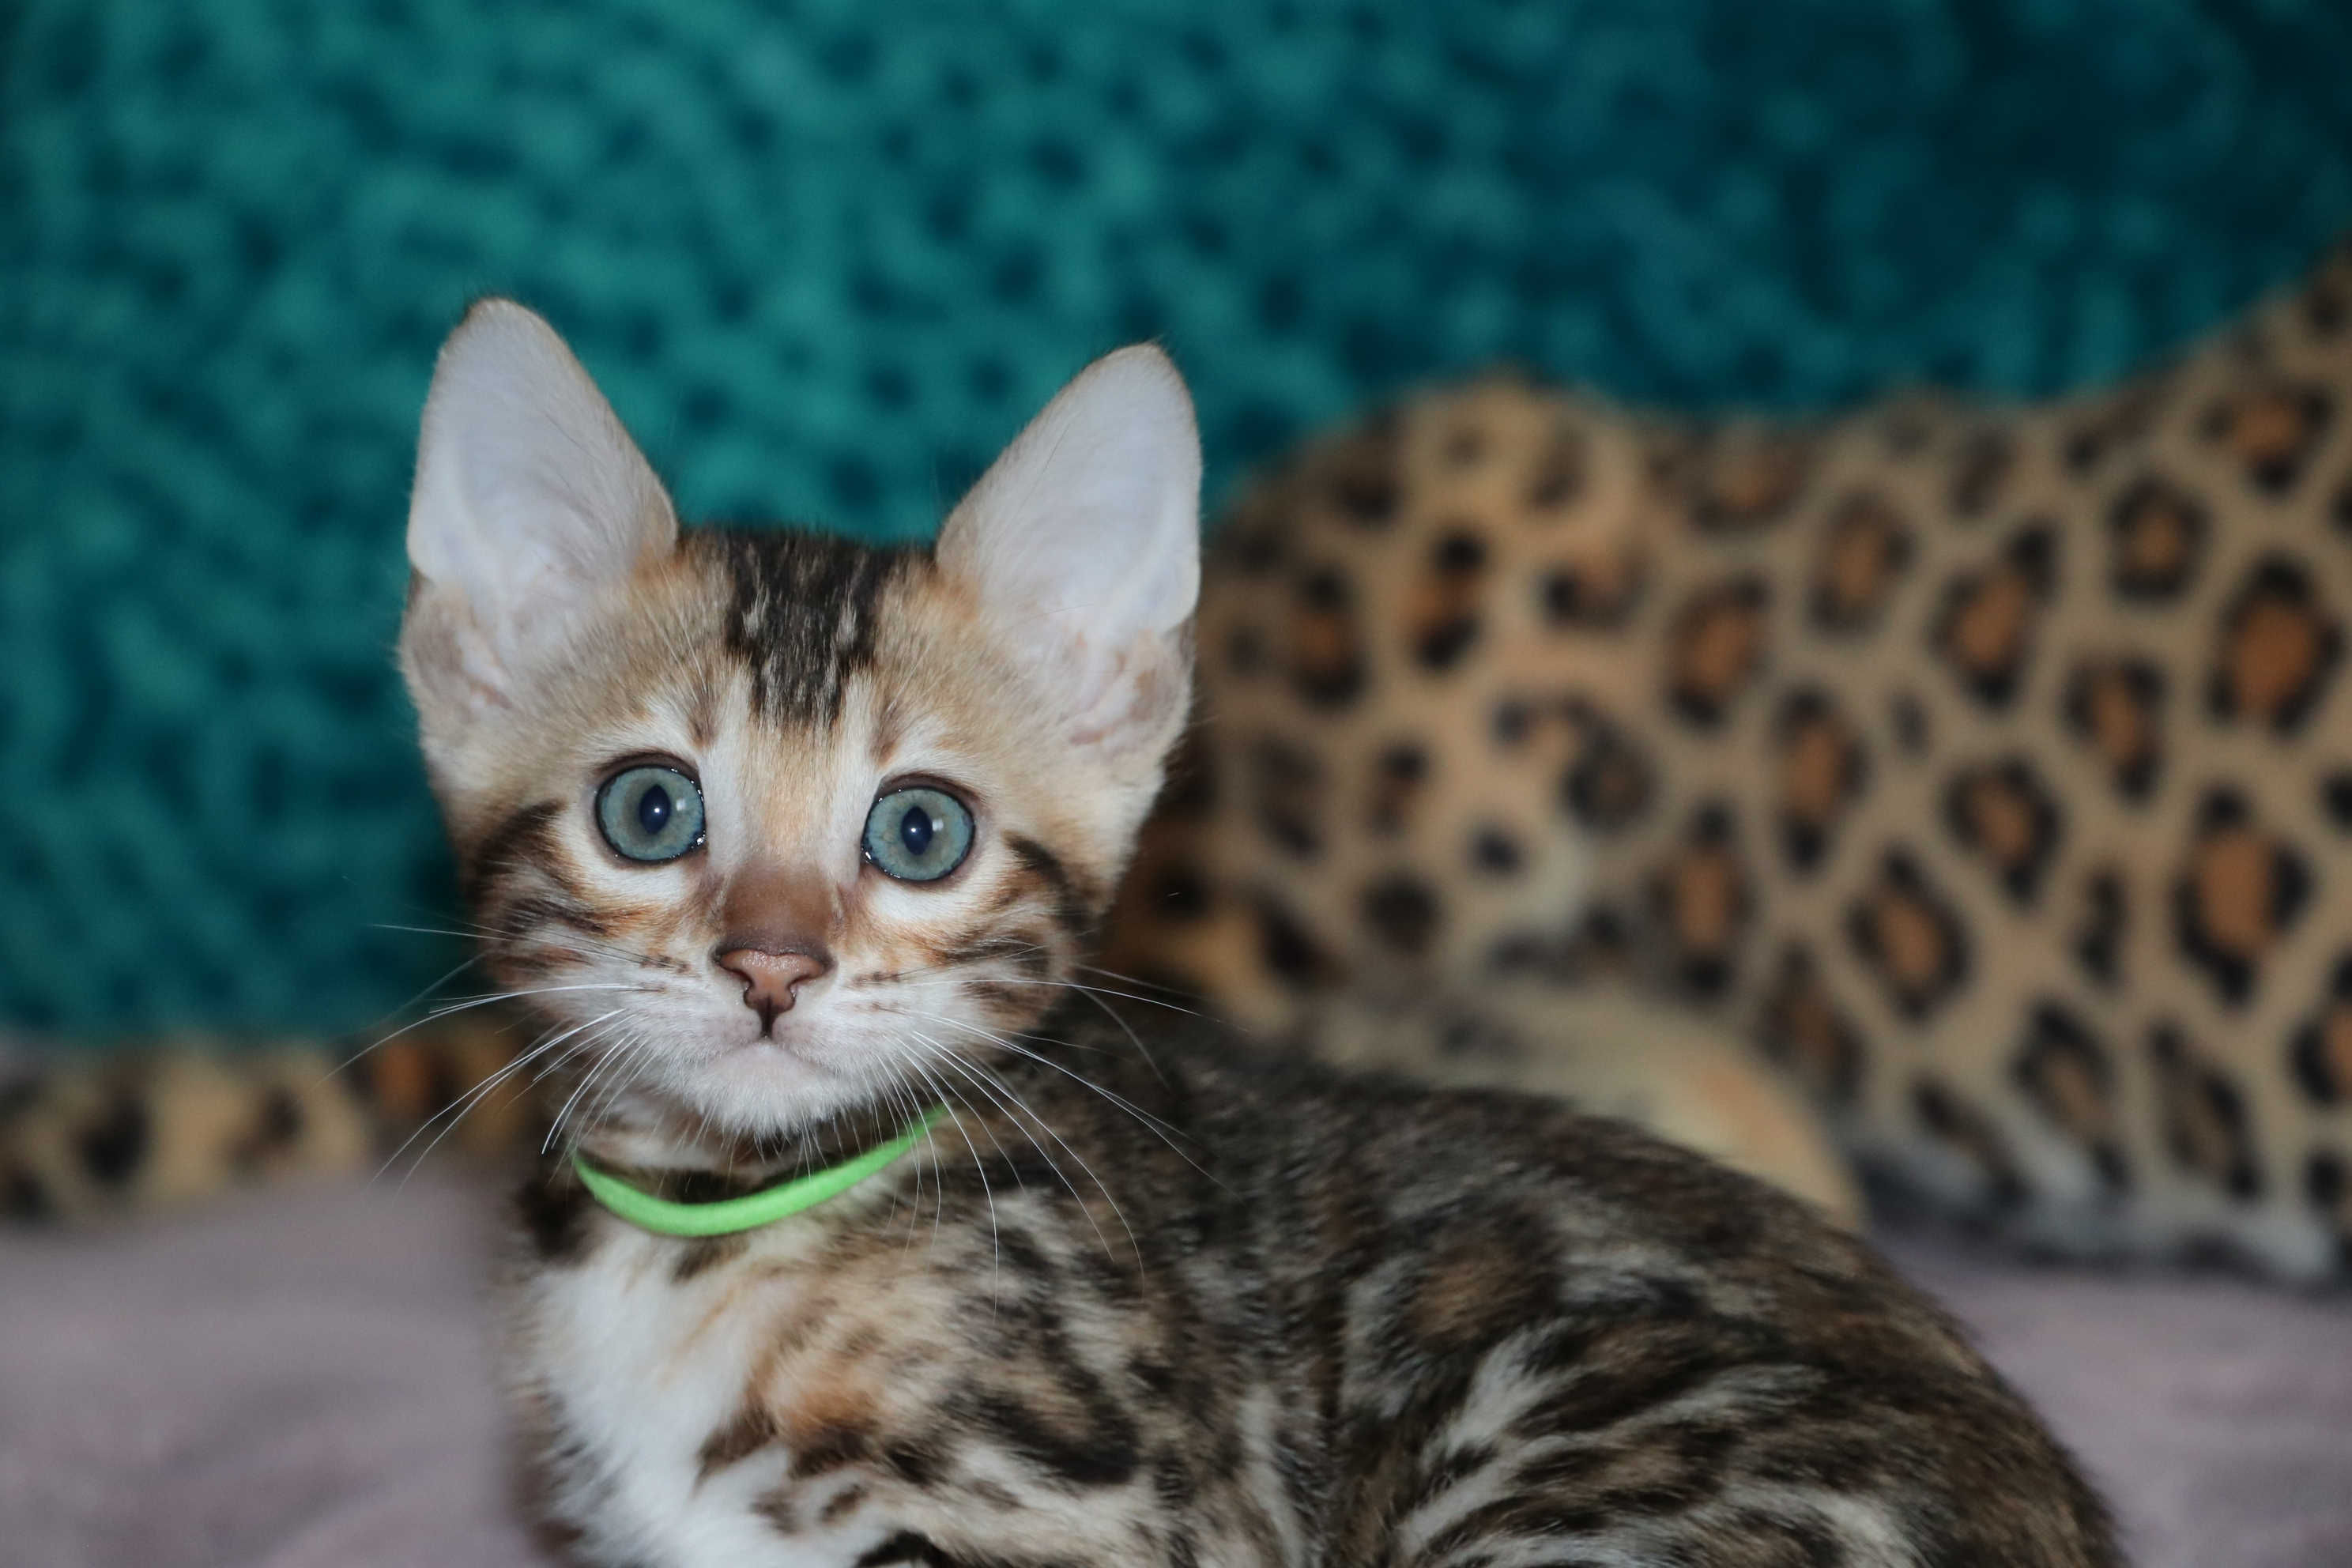 One of the best Bengal Kittens